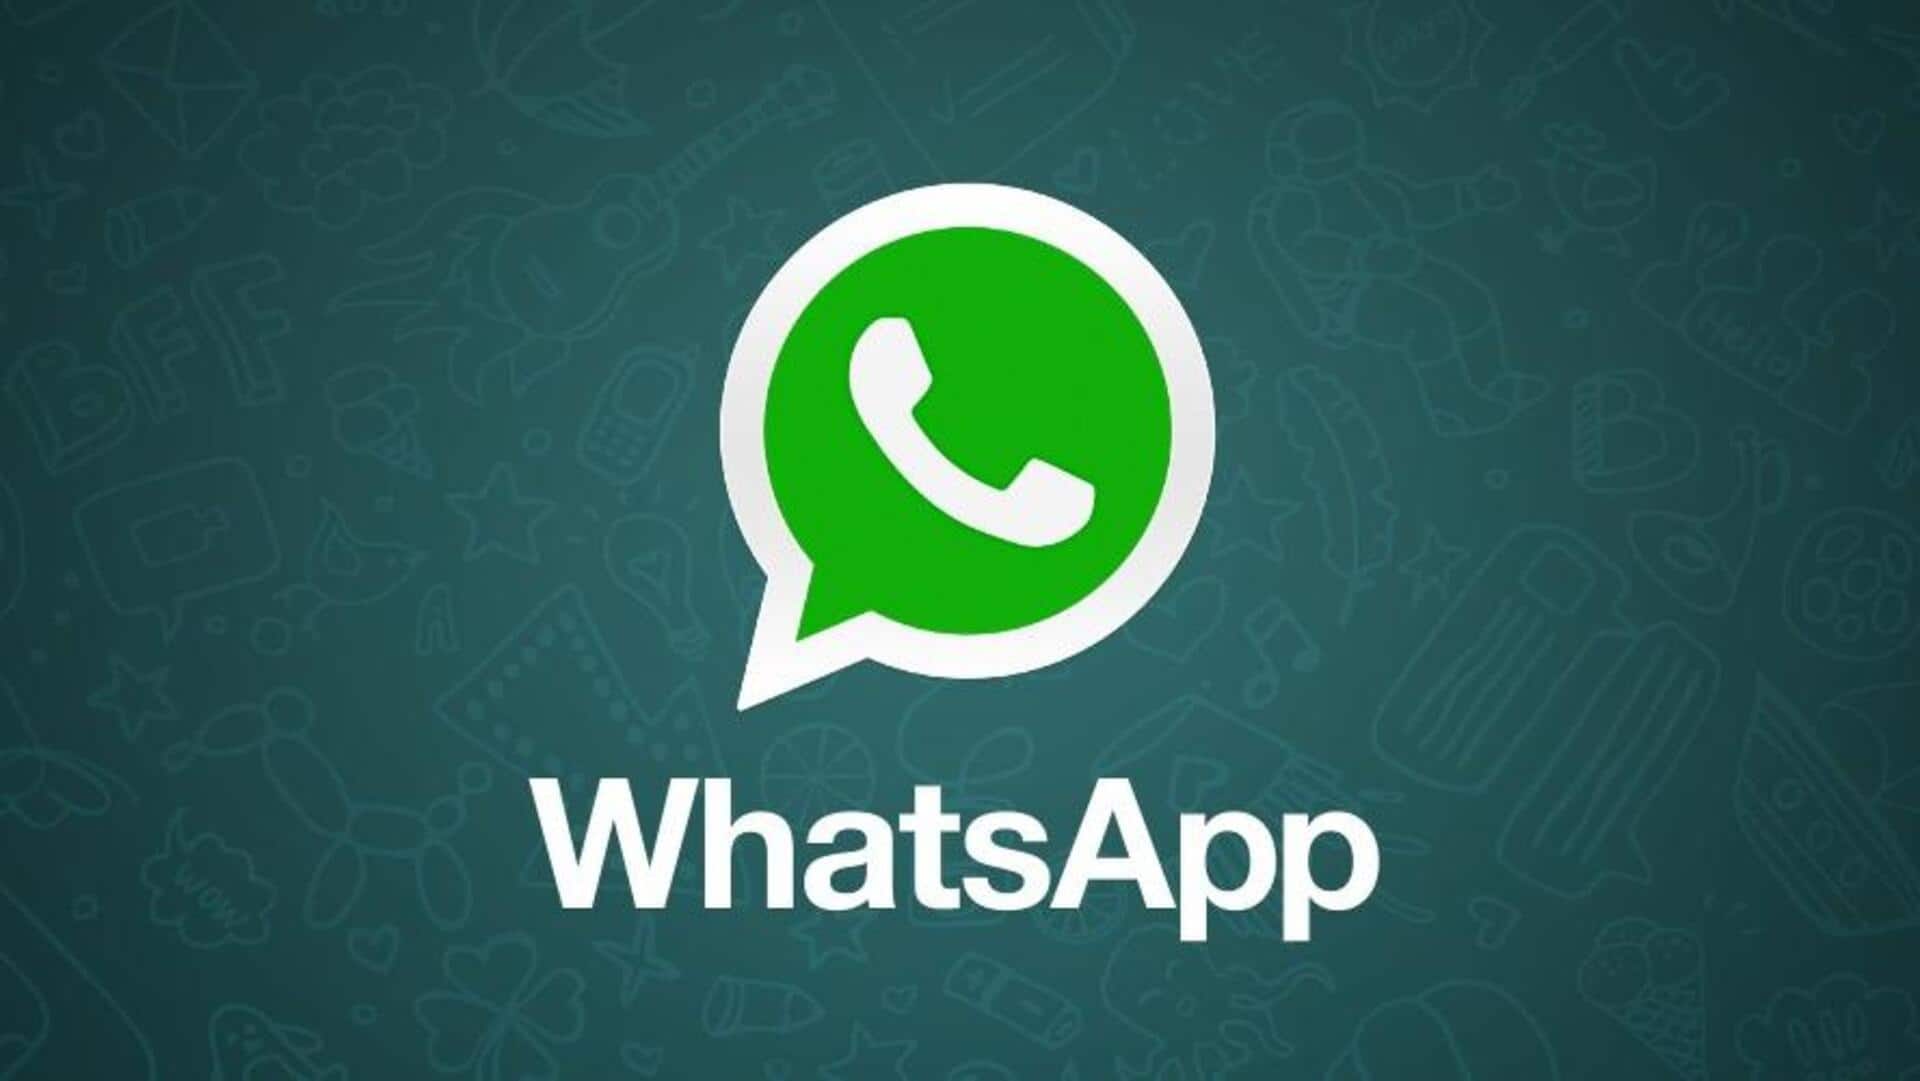 WhatsApp for Android brings channel pinning feature: How it works